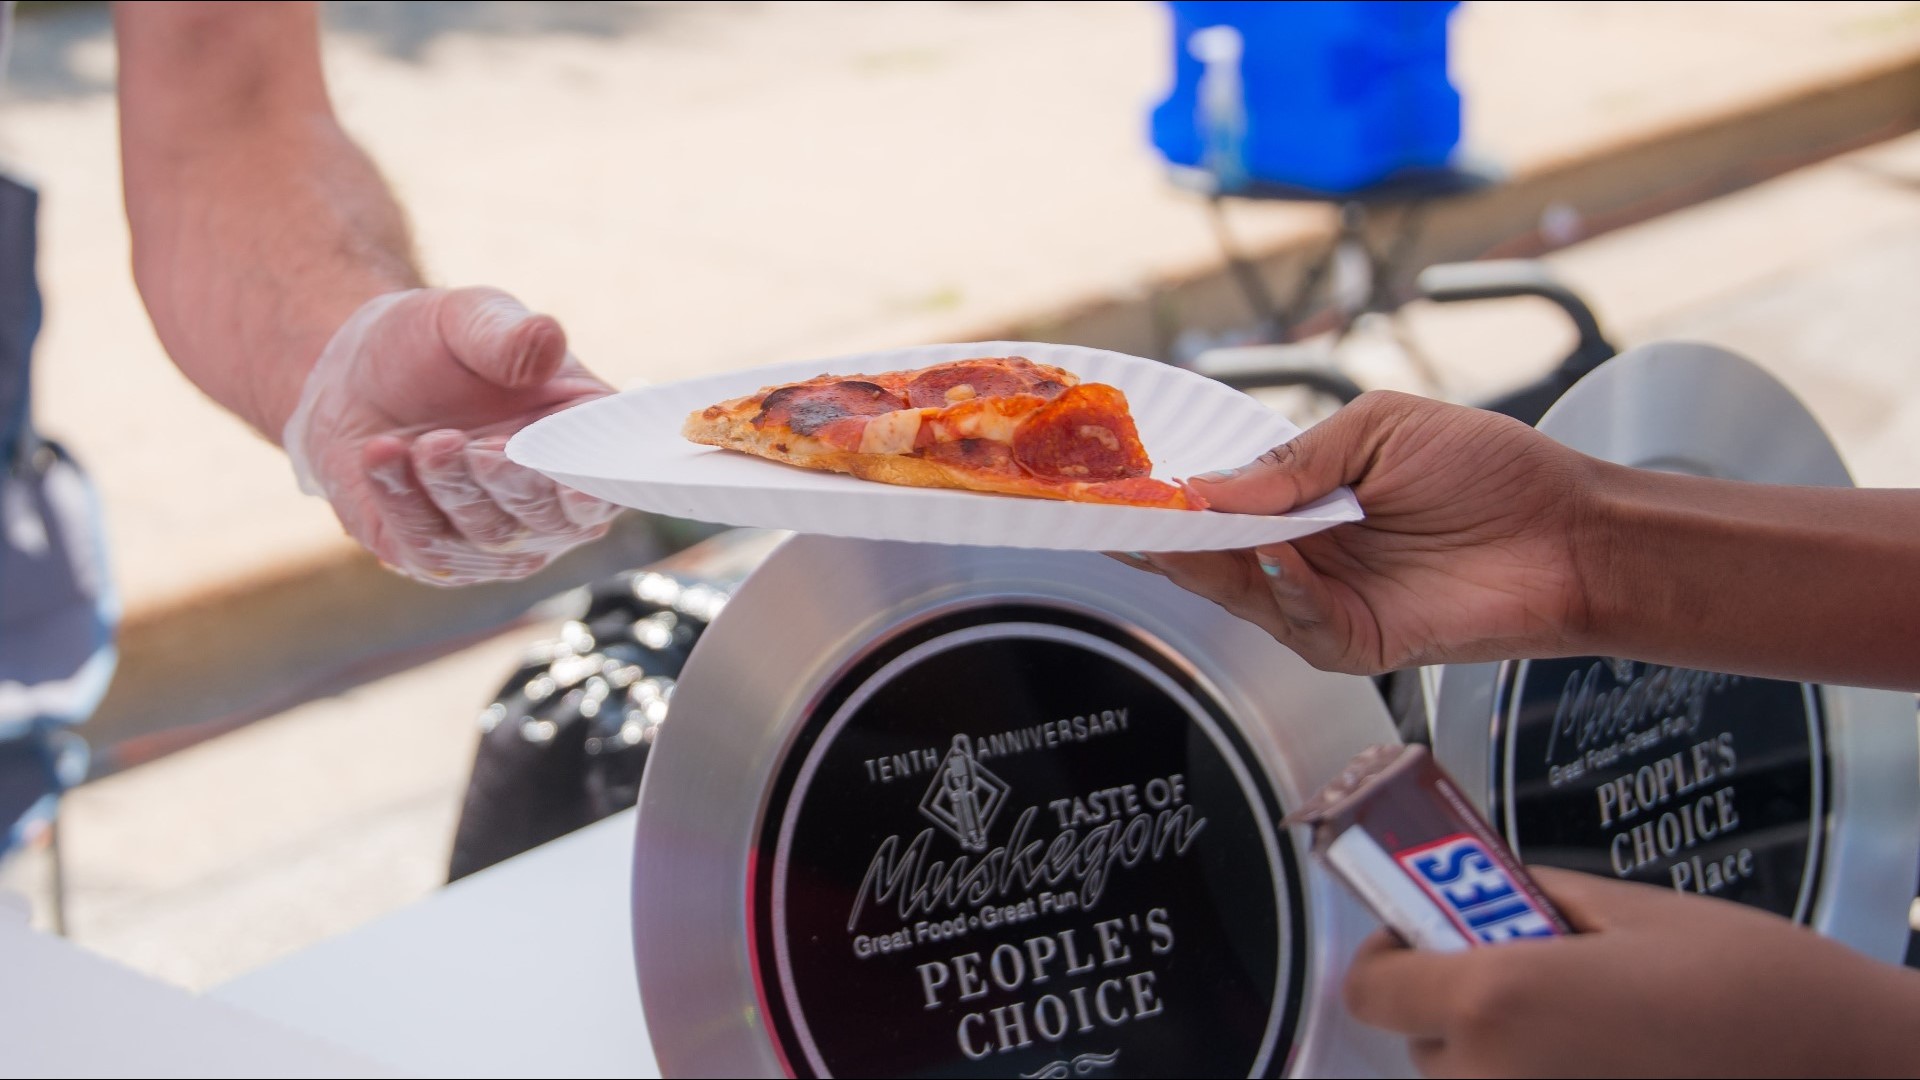 Hope you're hungry! Taste of Muskegon is happening today and Saturday, joining forces with Parties in the Park for a night full of food, music and fun.